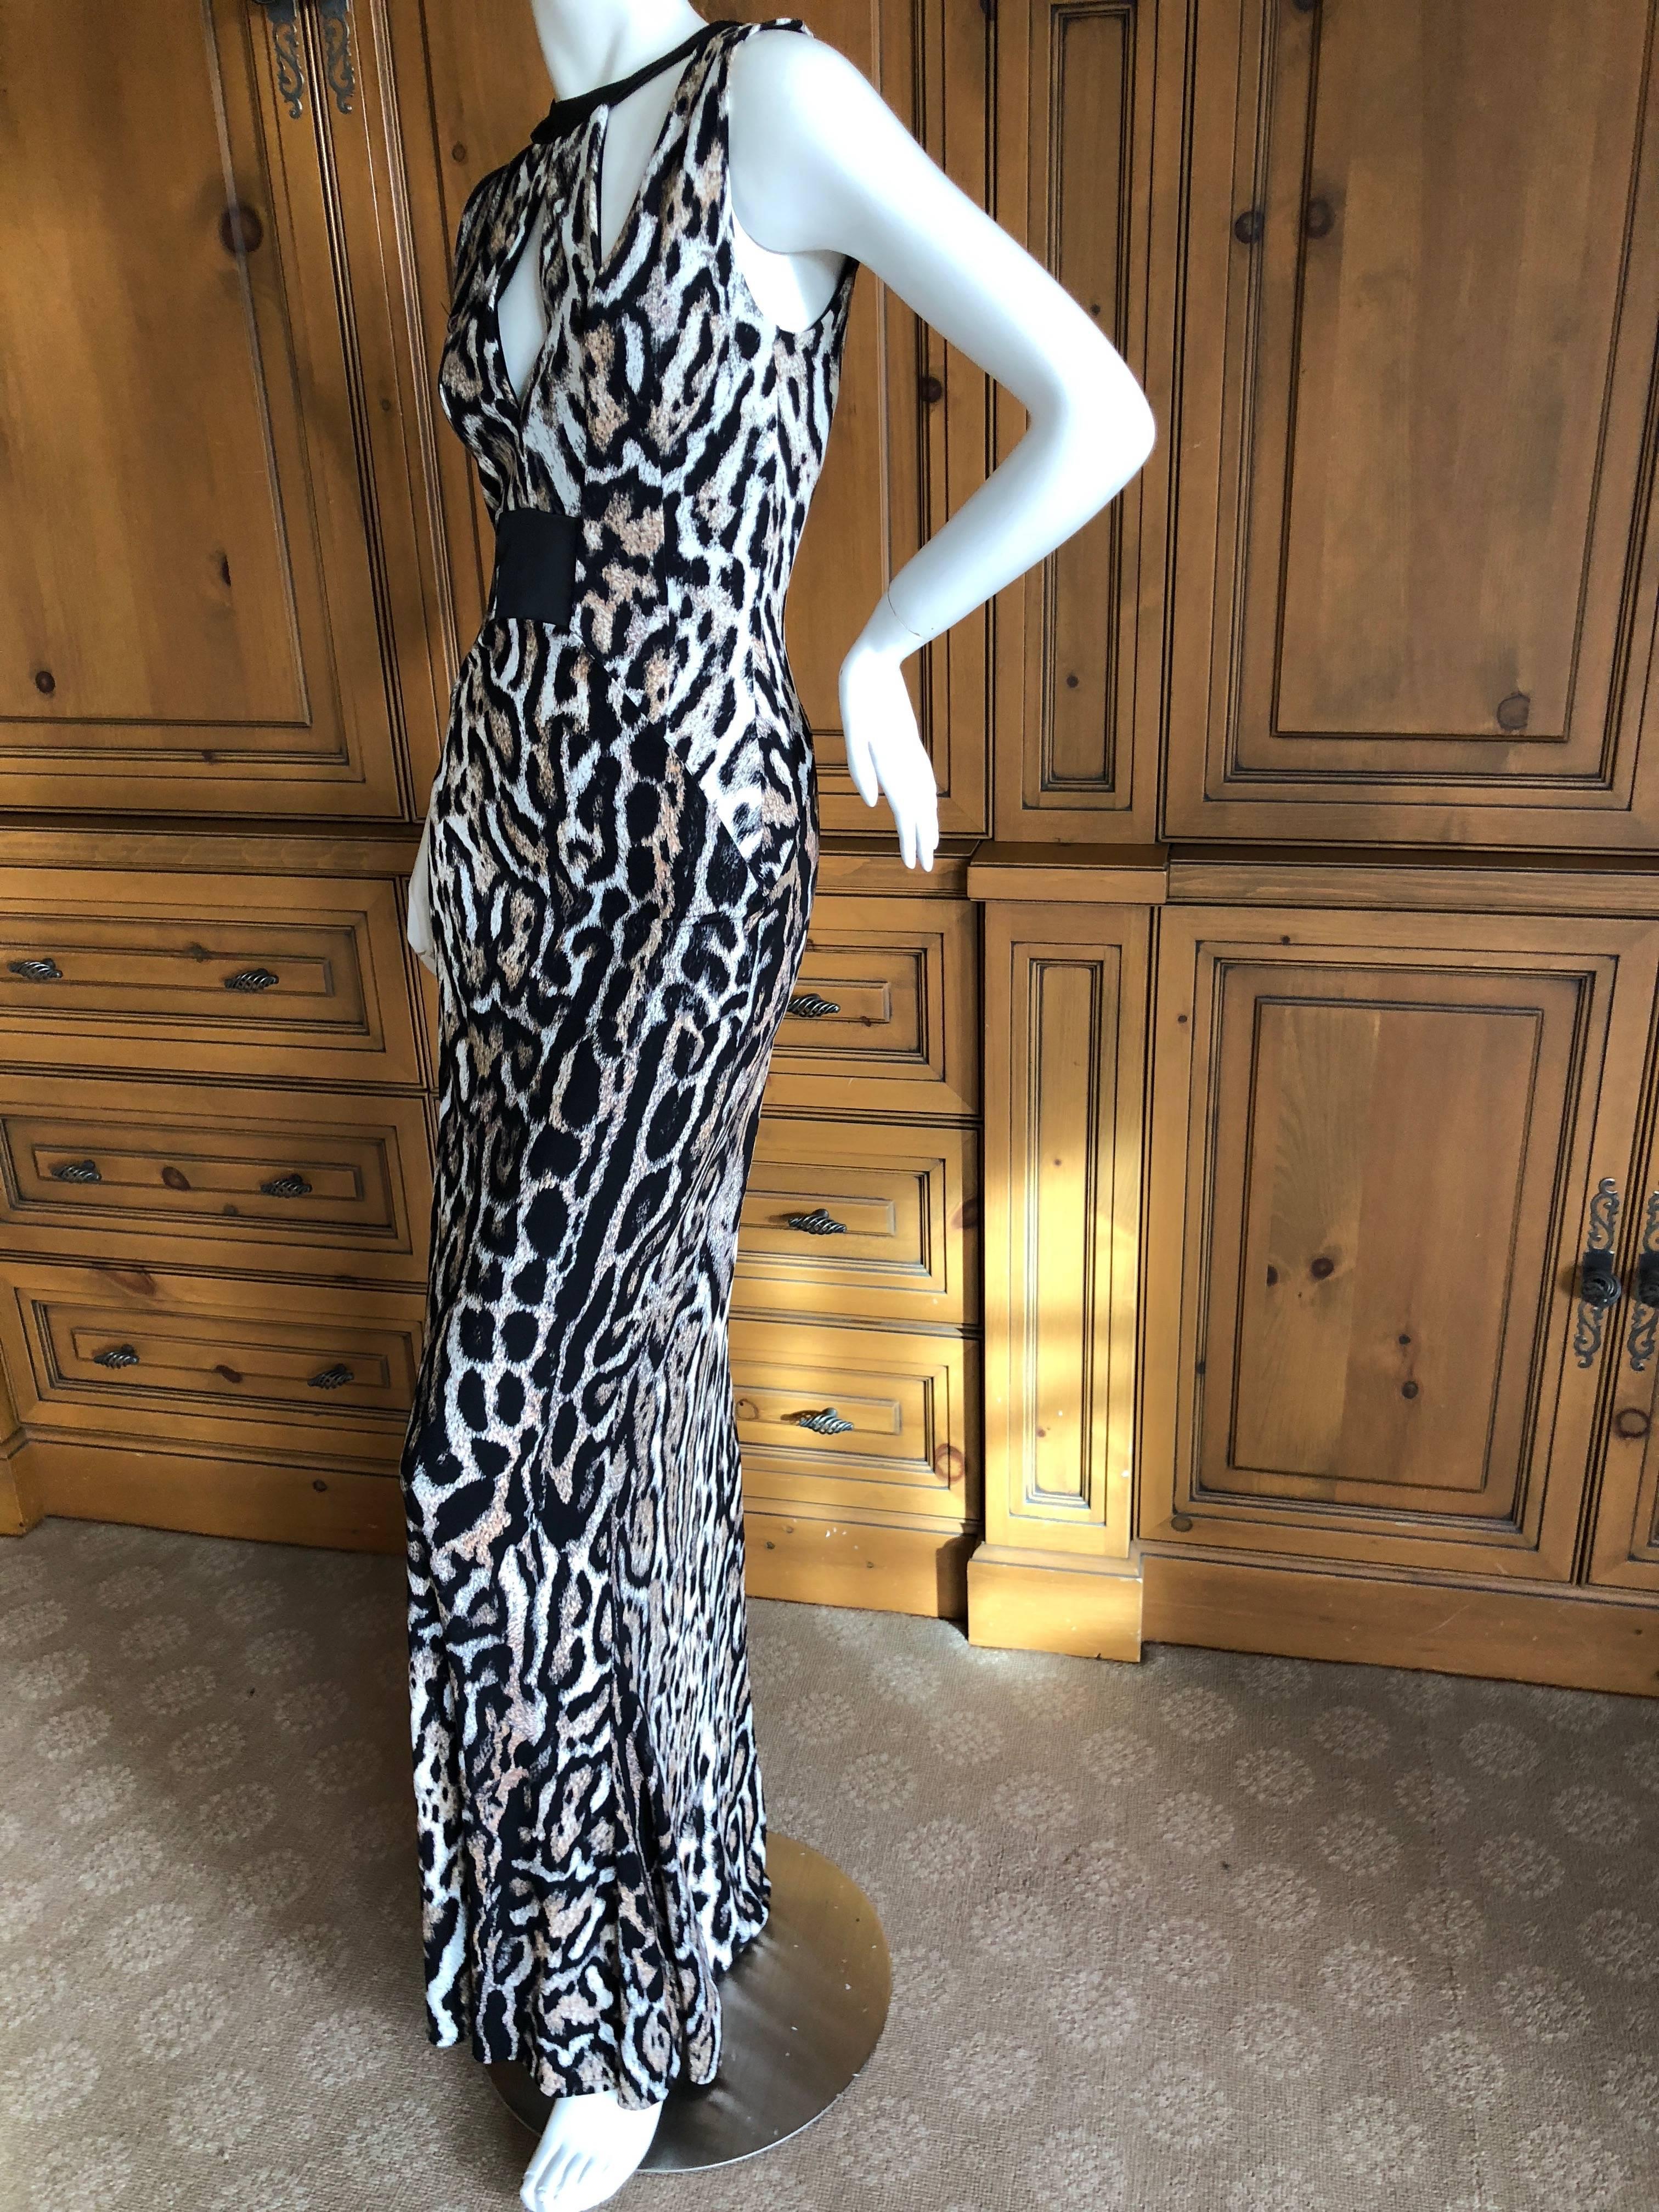 Roberto Cavalli Long Leopard Dress with Cut Outs for Just Cavalli For Sale 3